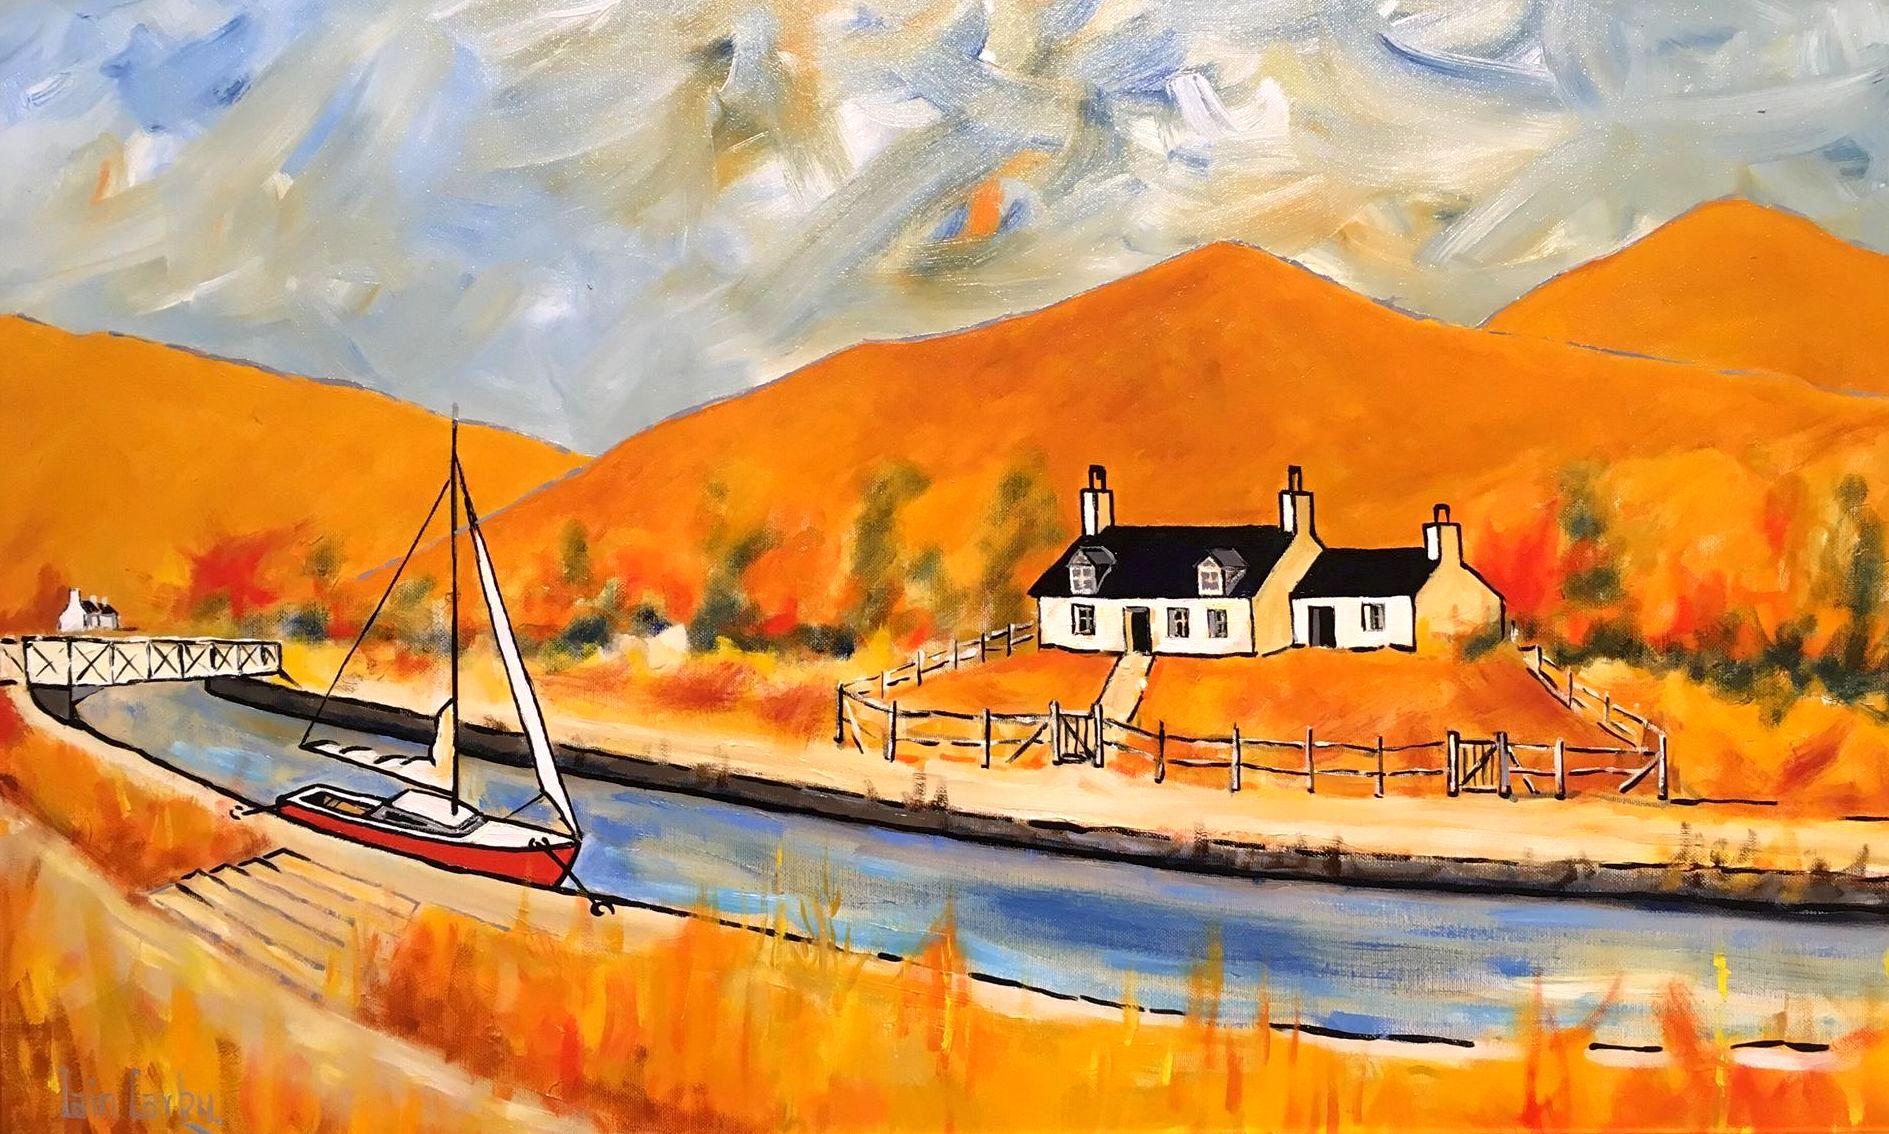 'On to the Crinan Canal' by artist Iain Carby